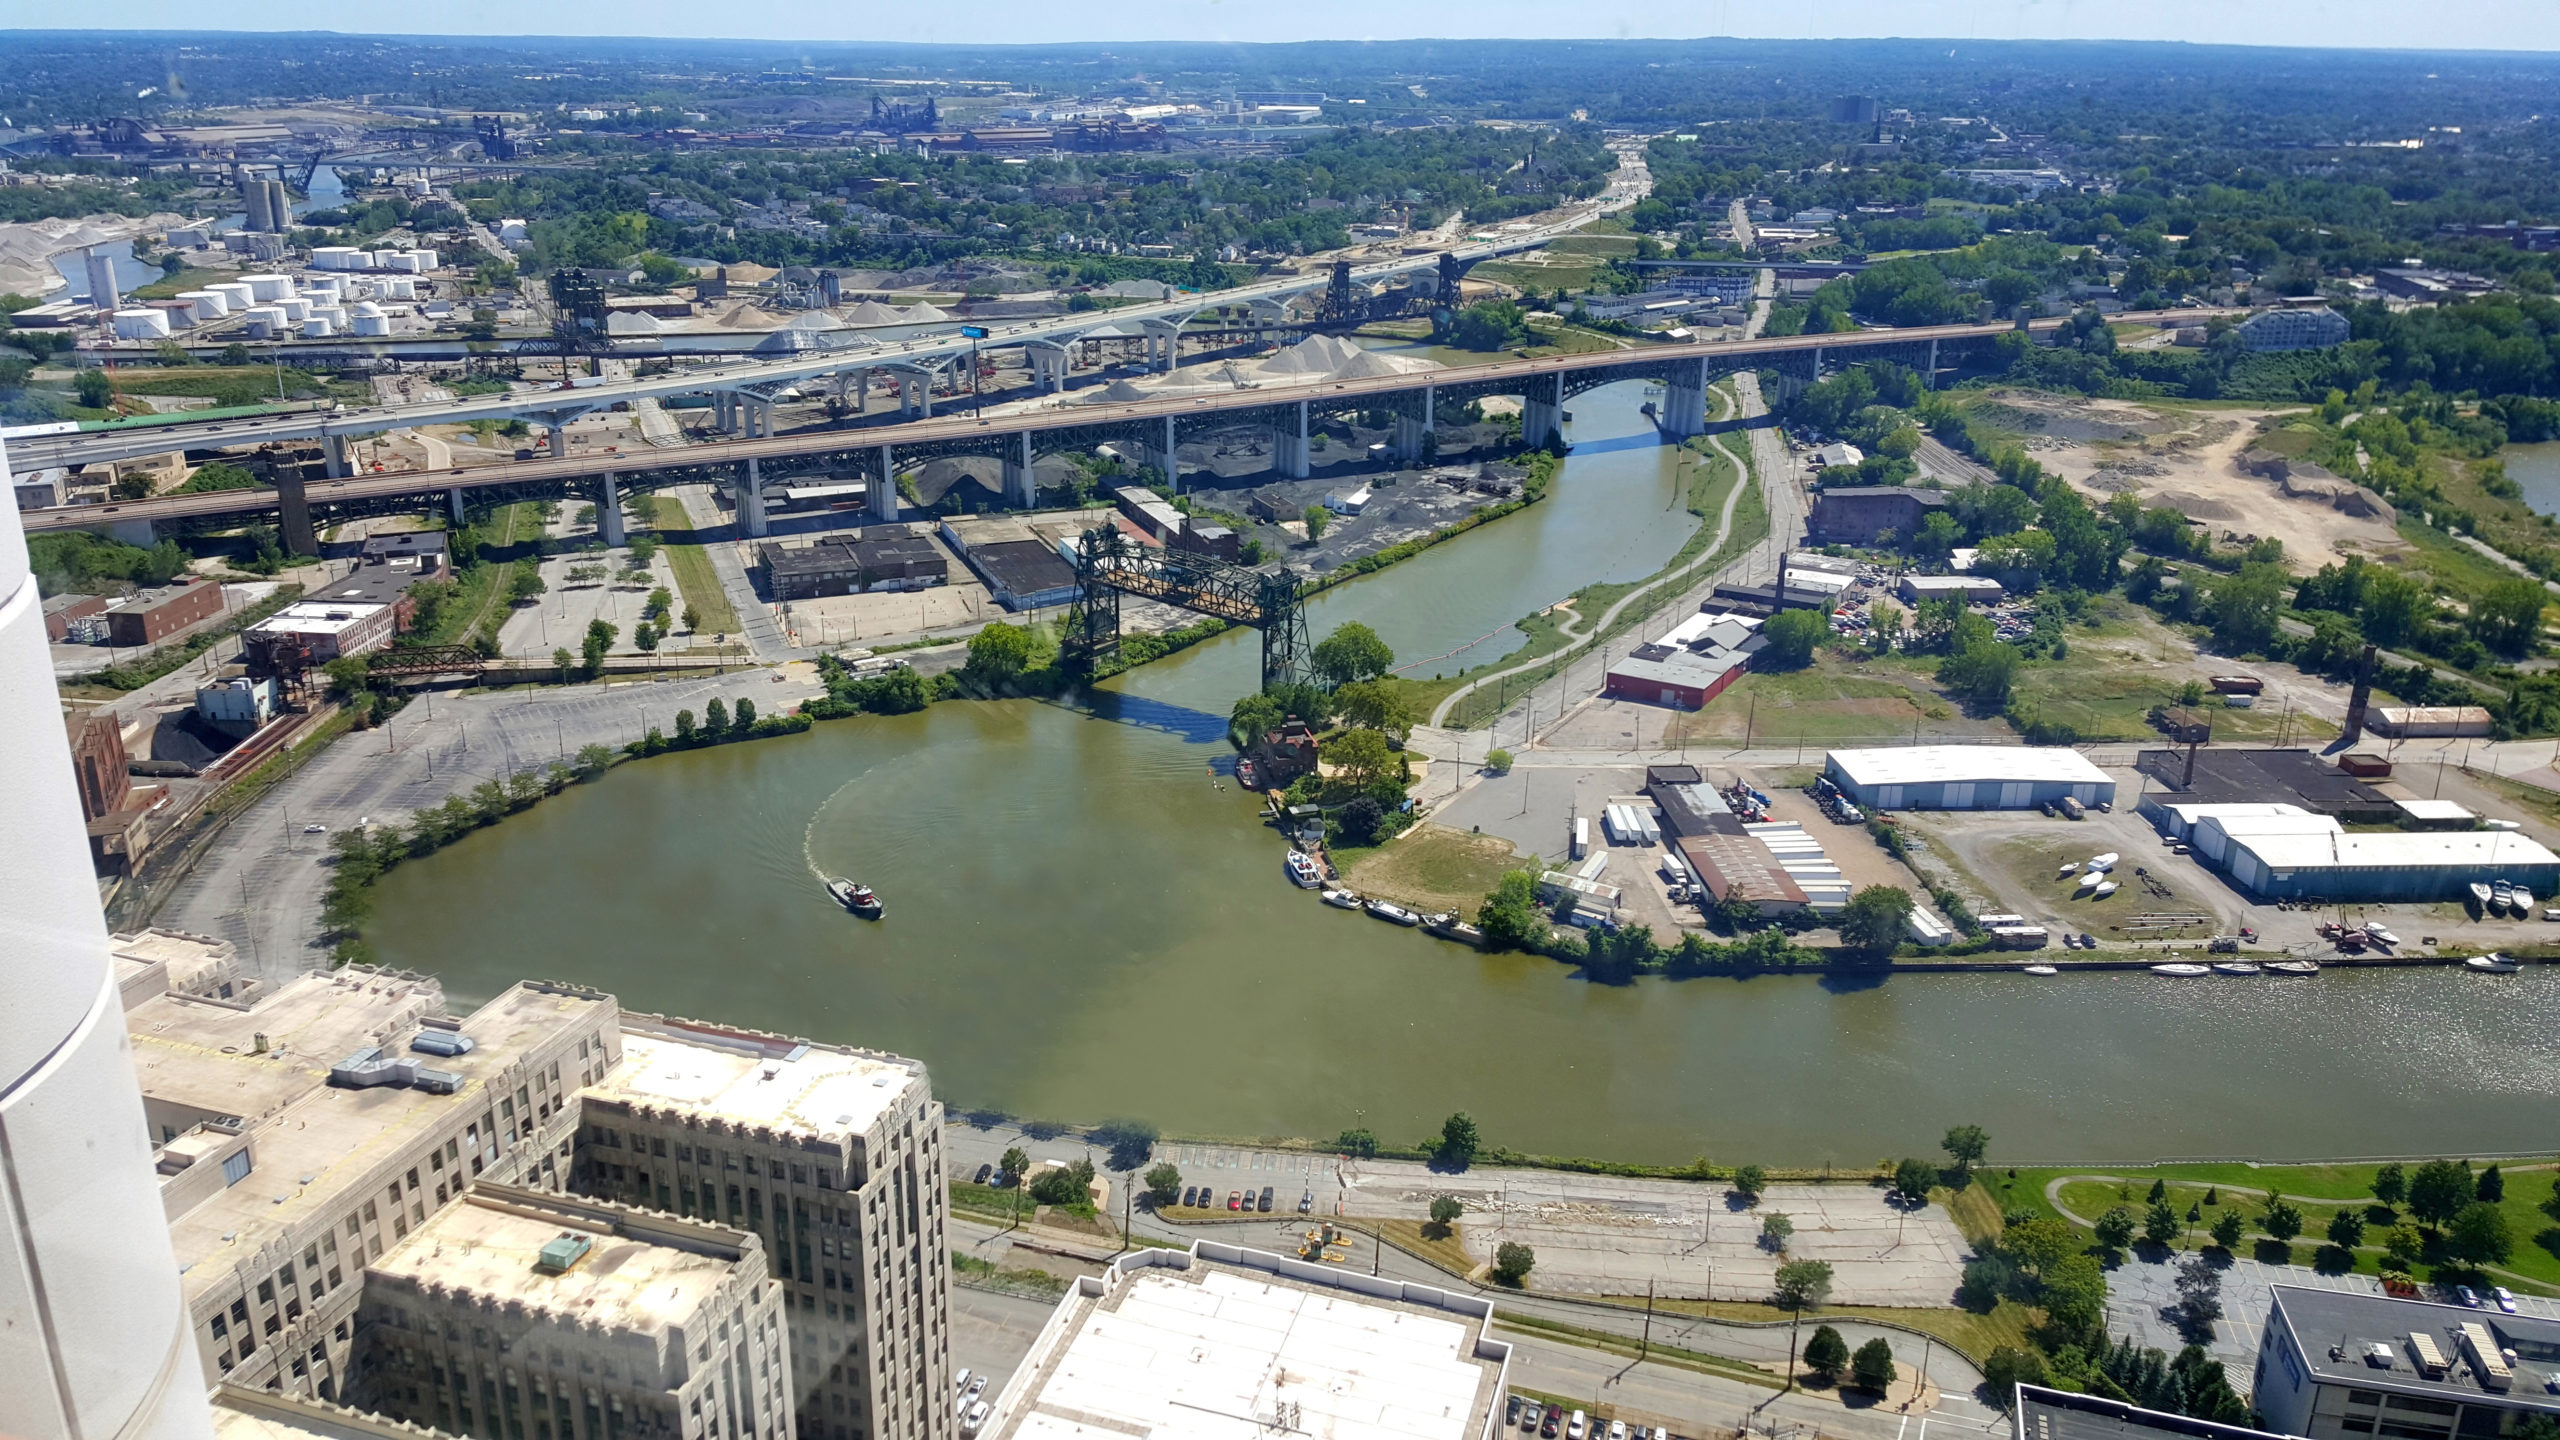 Aerial view of the Cuyahoga River in downtown Cleveland, Ohio, a river surrounded by urban infrastructure.